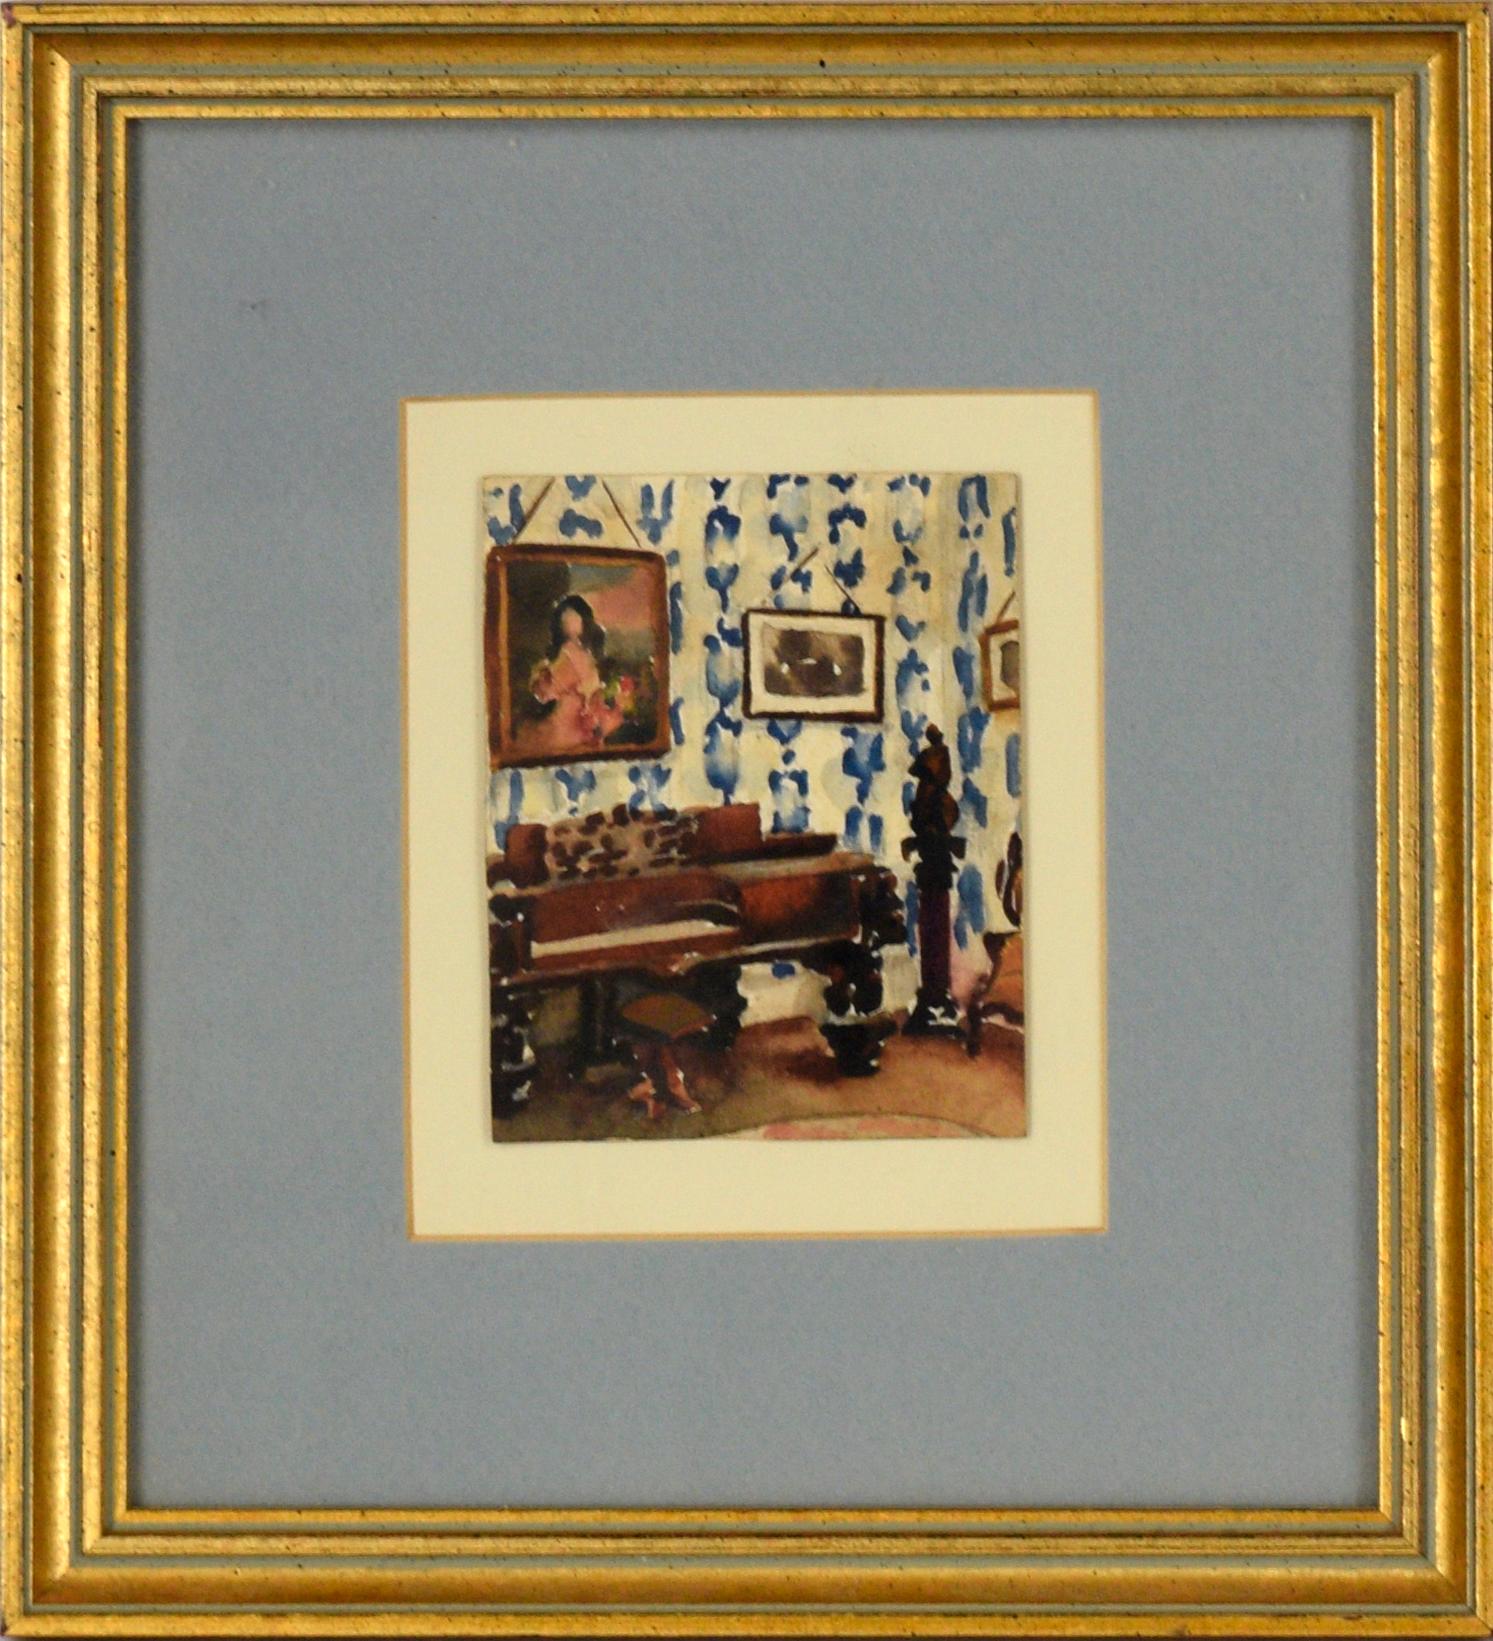 Pair of Interior Scenes of a Victorian Home - Watercolor on Heavy Paper - Art by David Mode Payne